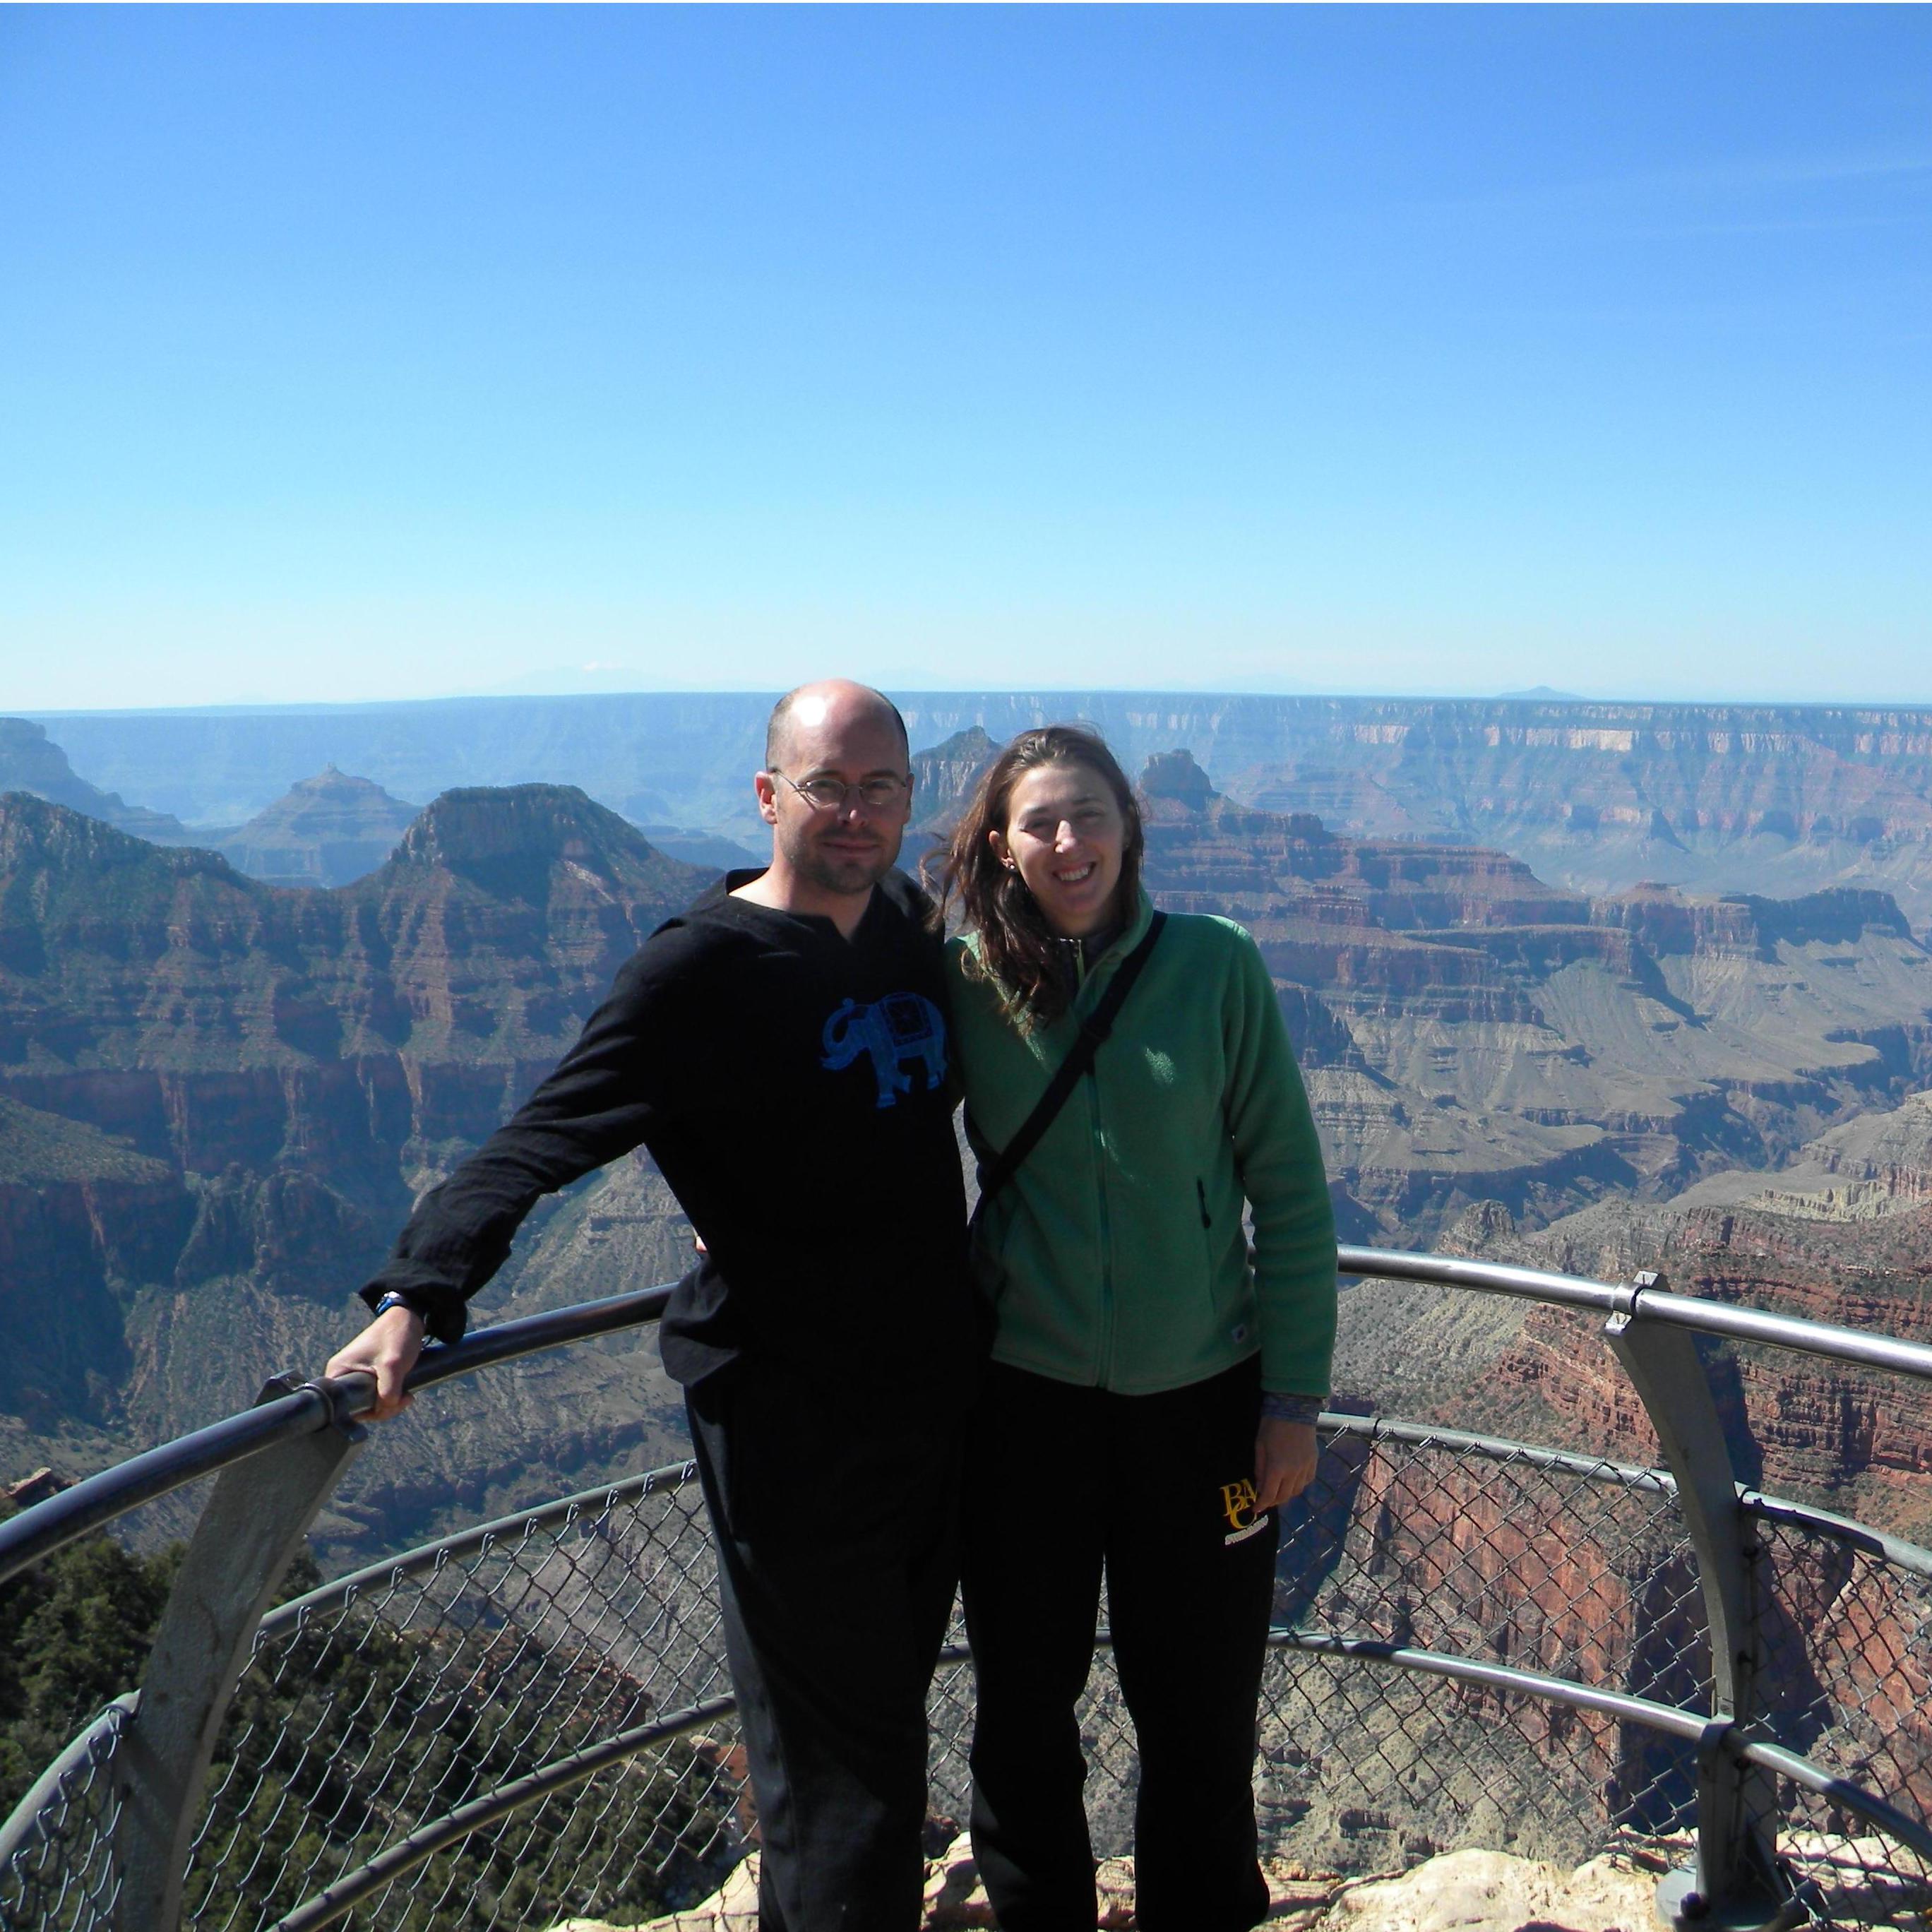 June 2015, we enjoyed a 19 mile hike down into the Grand Canyon from the North Rim.  (This picture is after a long breakfast the next morning)